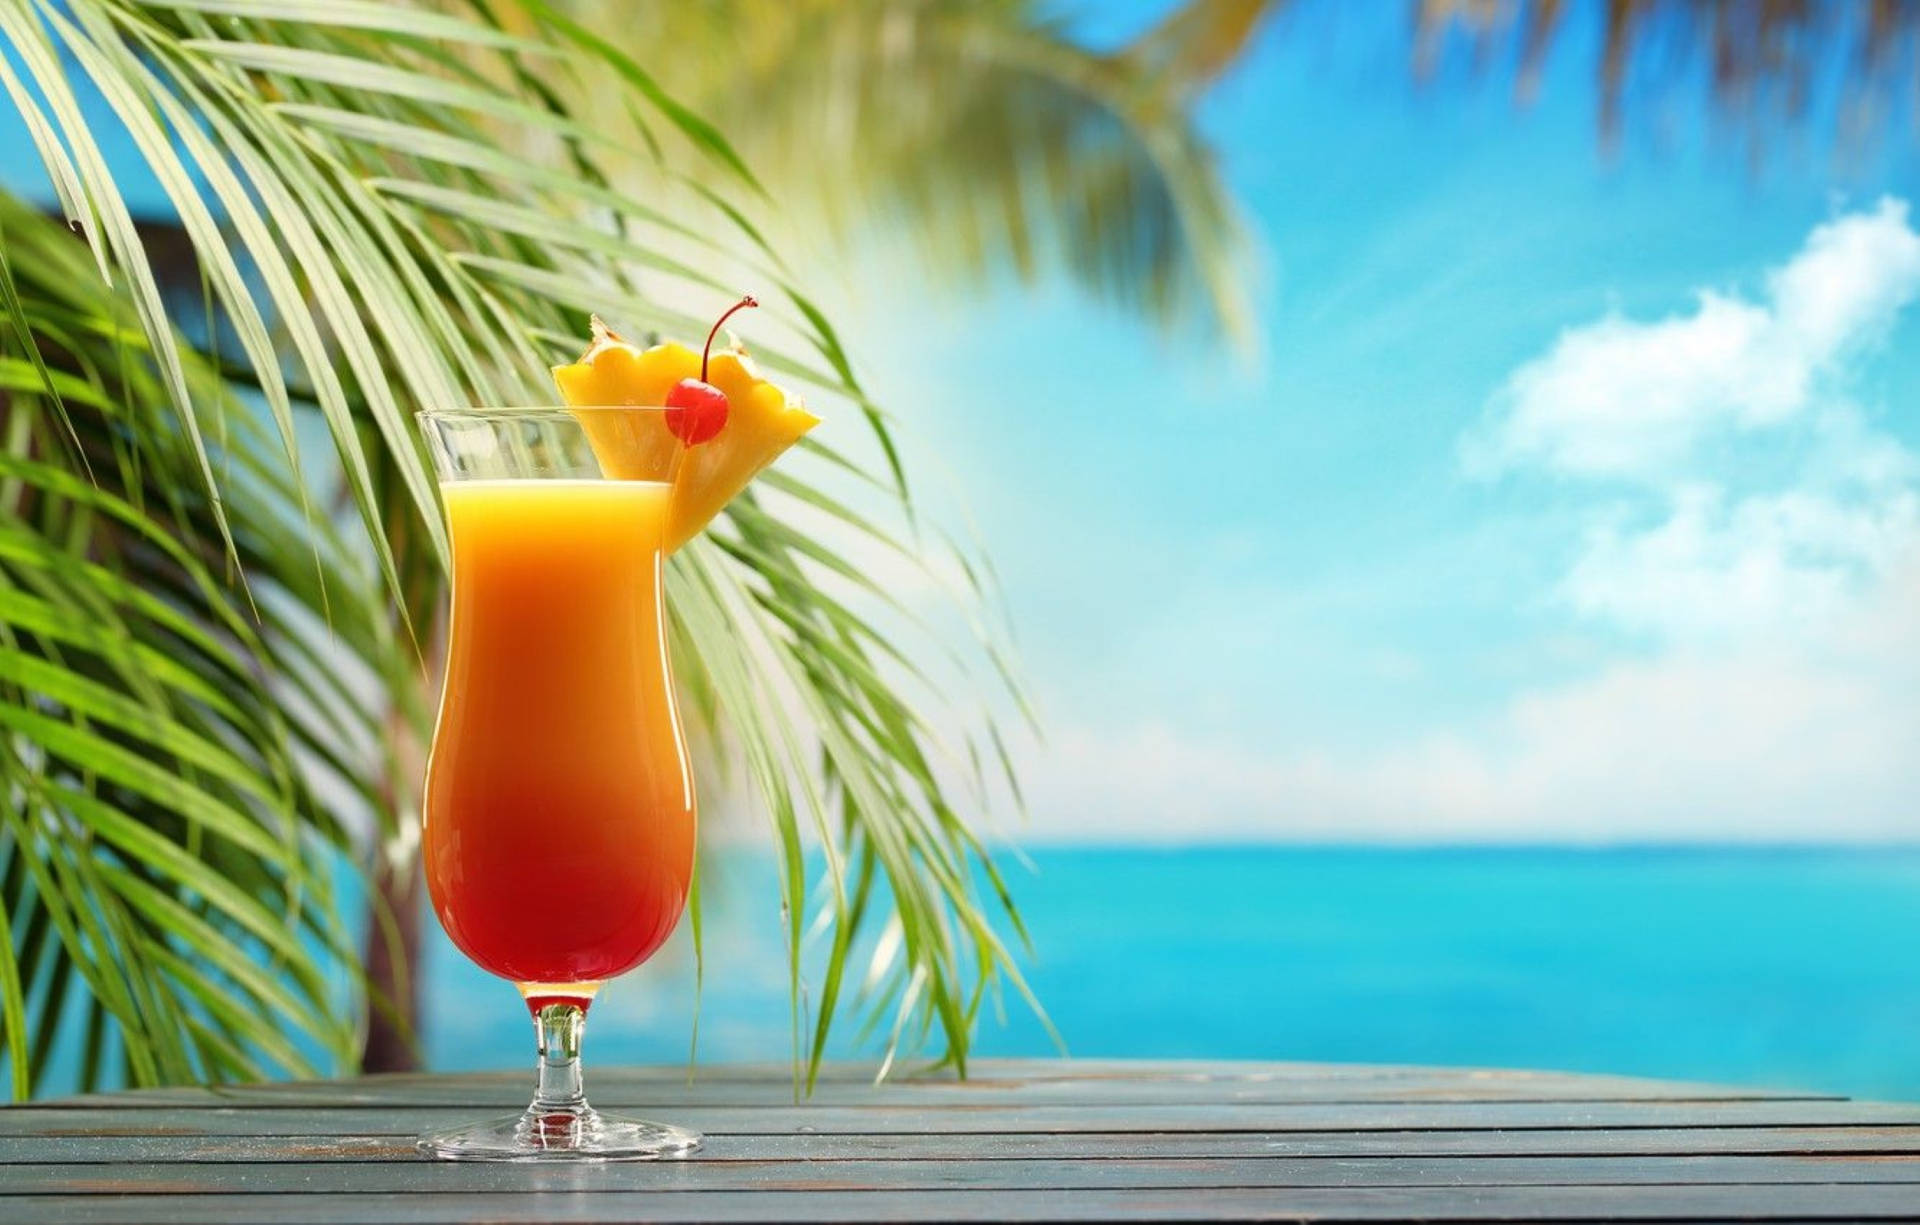 California Surfer's Tropical Drink Background